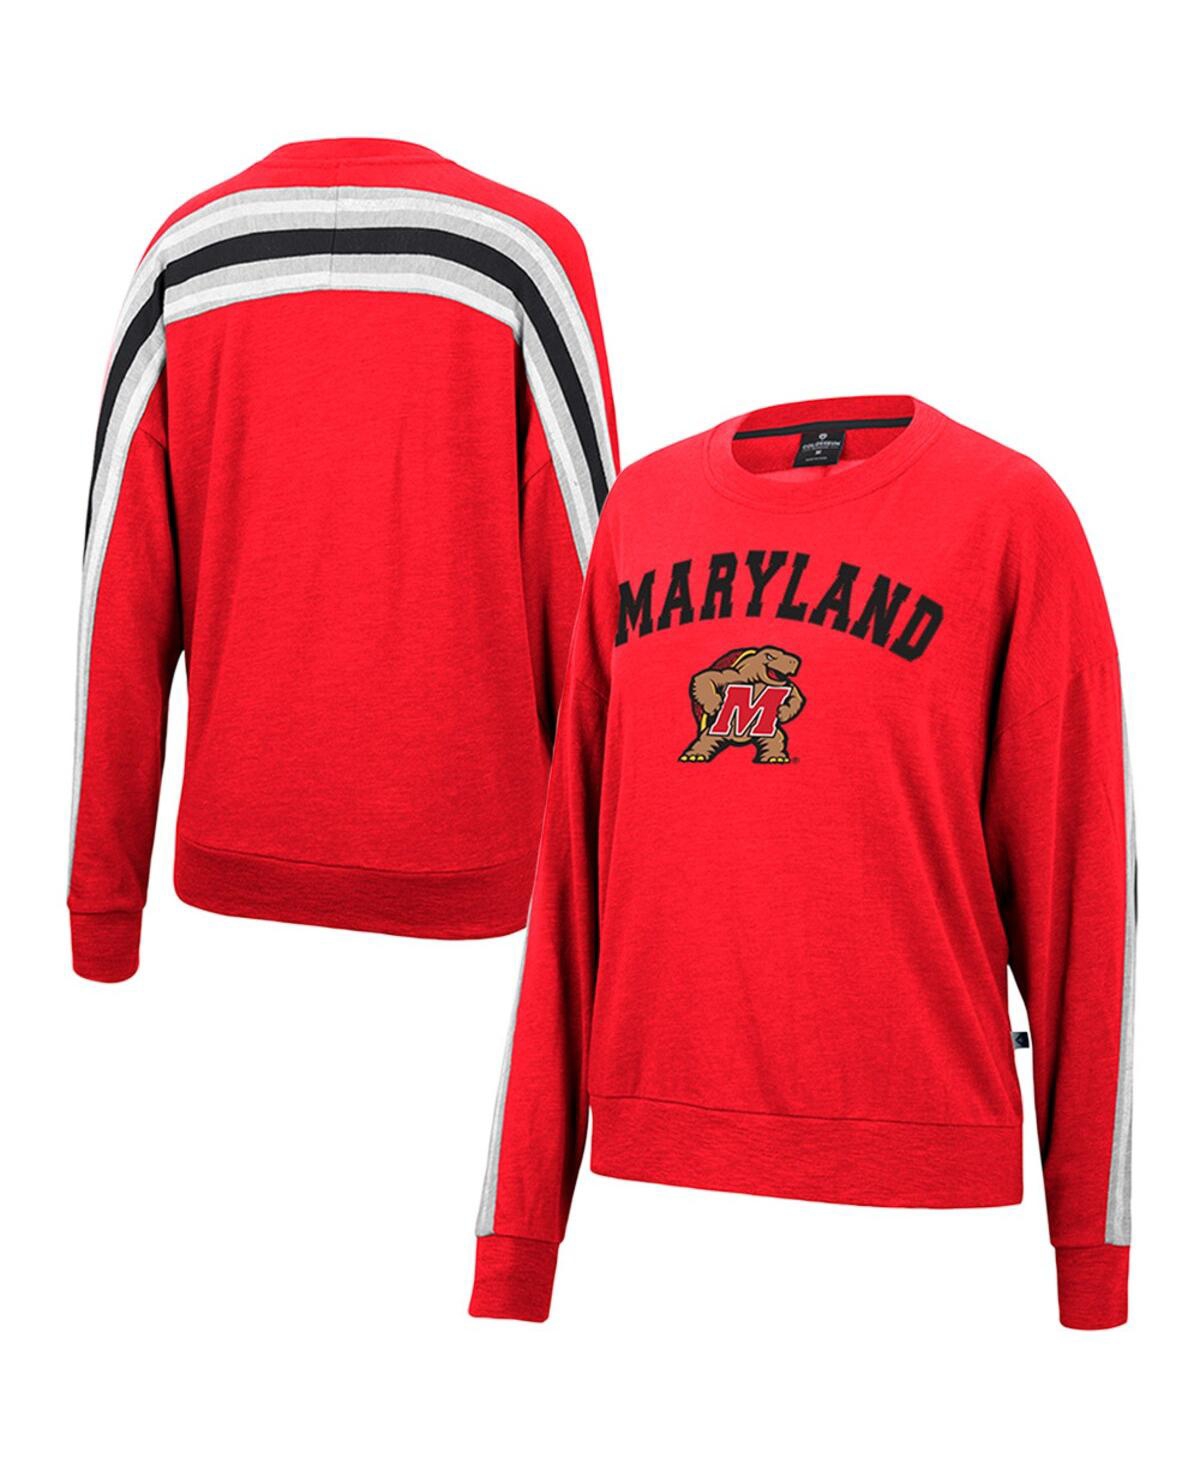 Women's Colosseum Heathered Red Maryland Terrapins Team Oversized Pullover Sweatshirt - Red